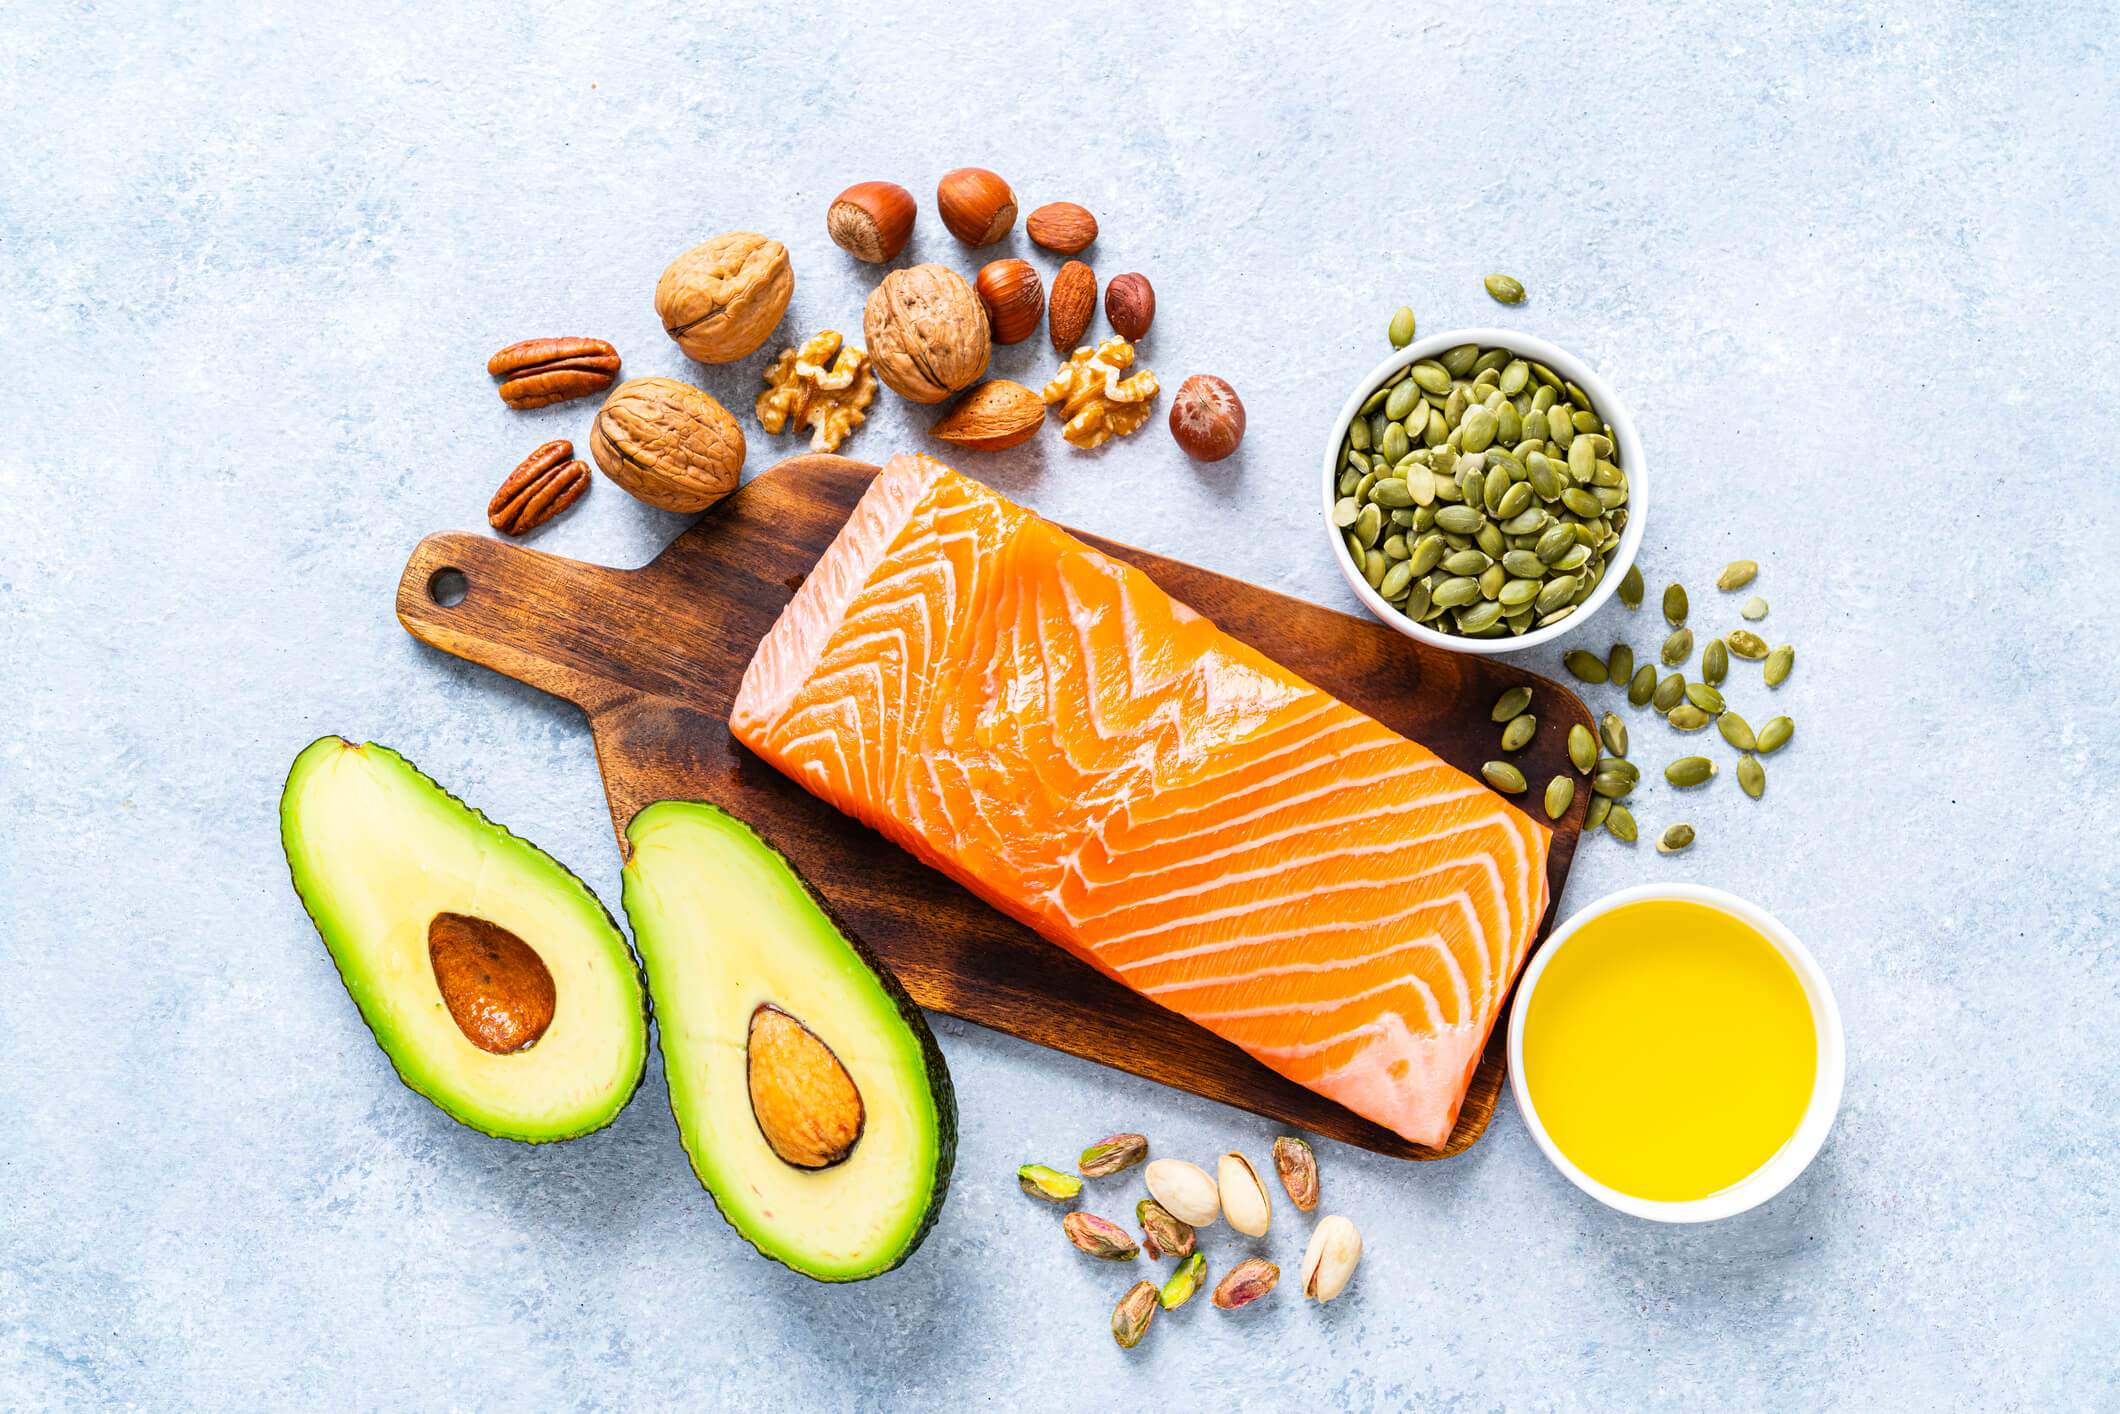 A collection of foods rich in healthy fats, including salmon, avocado, and nuts.